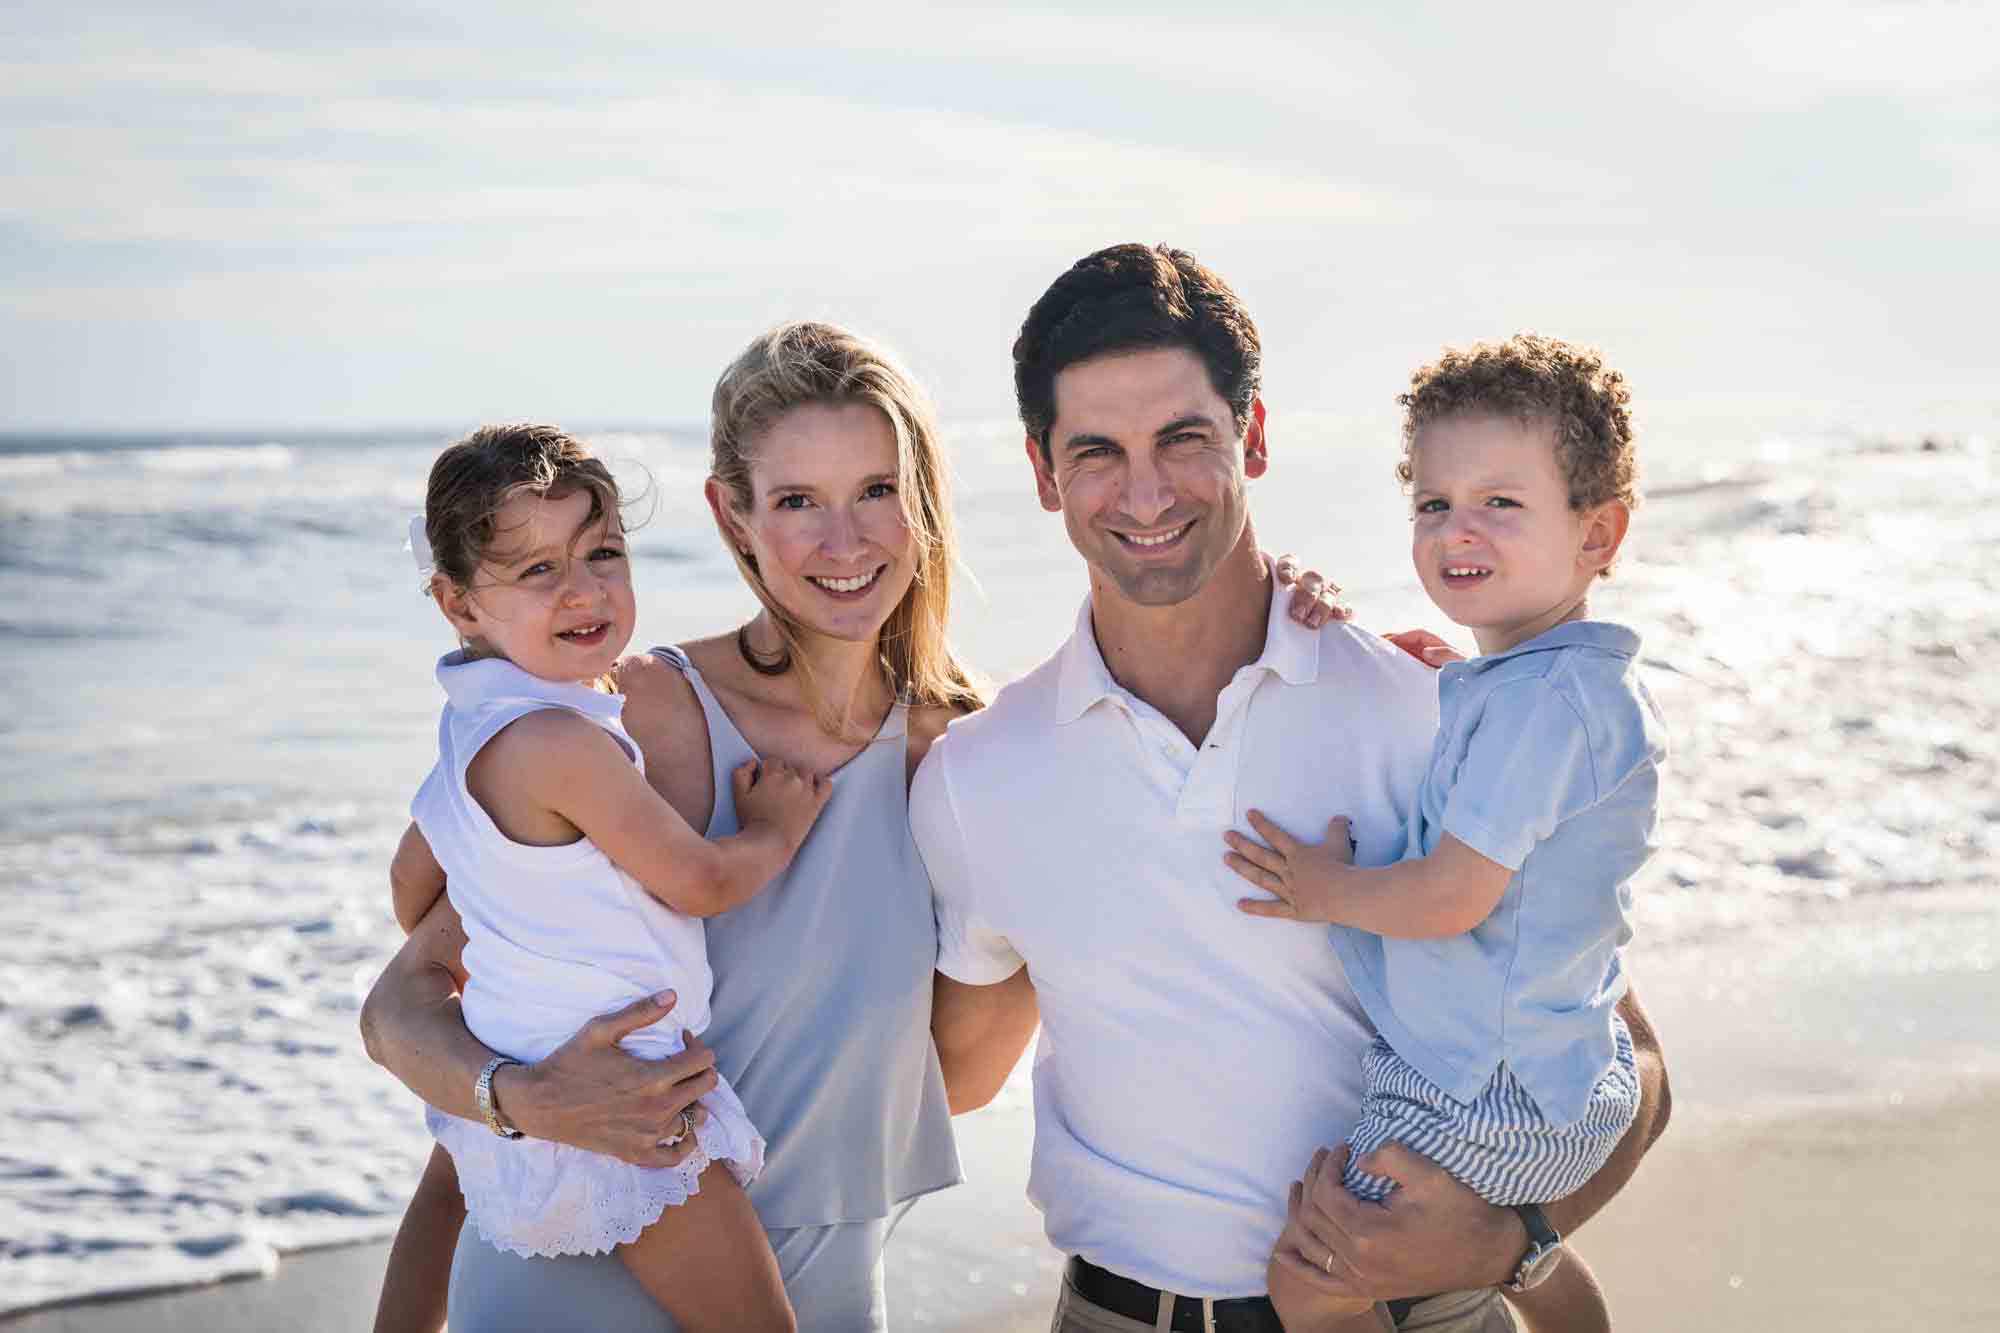 Parents holding two small children on beach in front of ocean for an article on beach family portrait tips